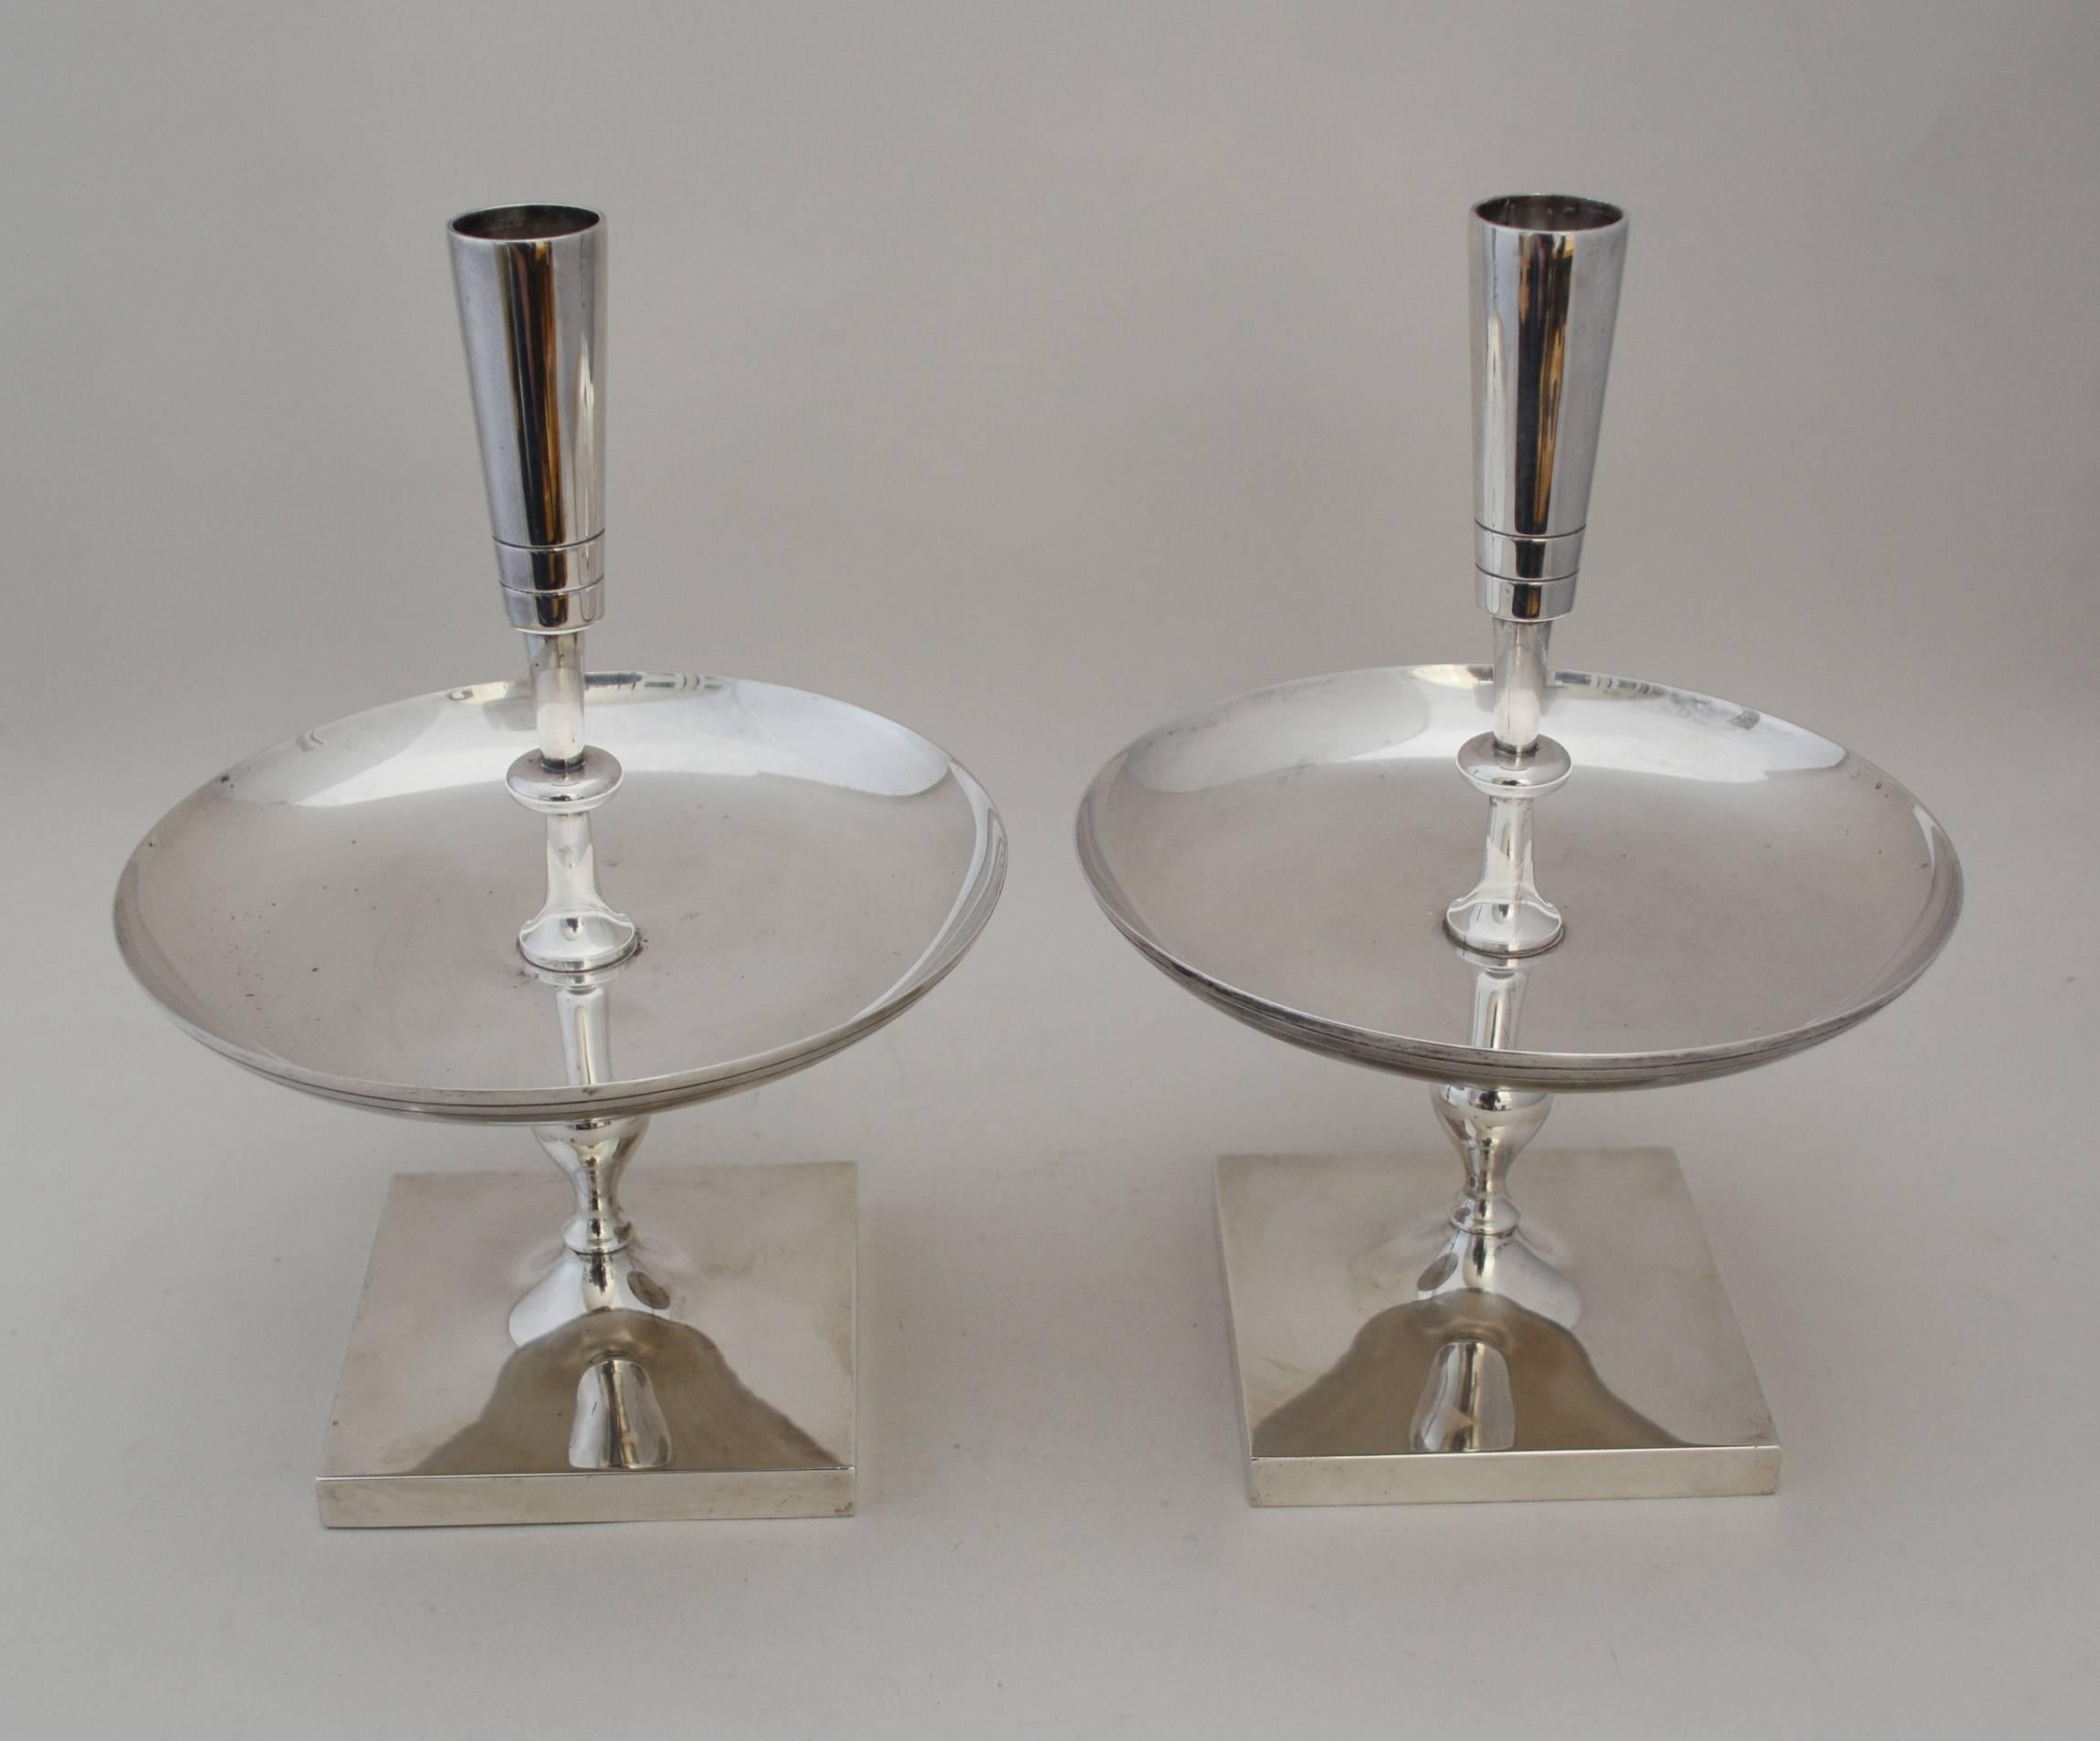 American Pair of Heirloom 700 Candlesticks by Tommi Parzinger